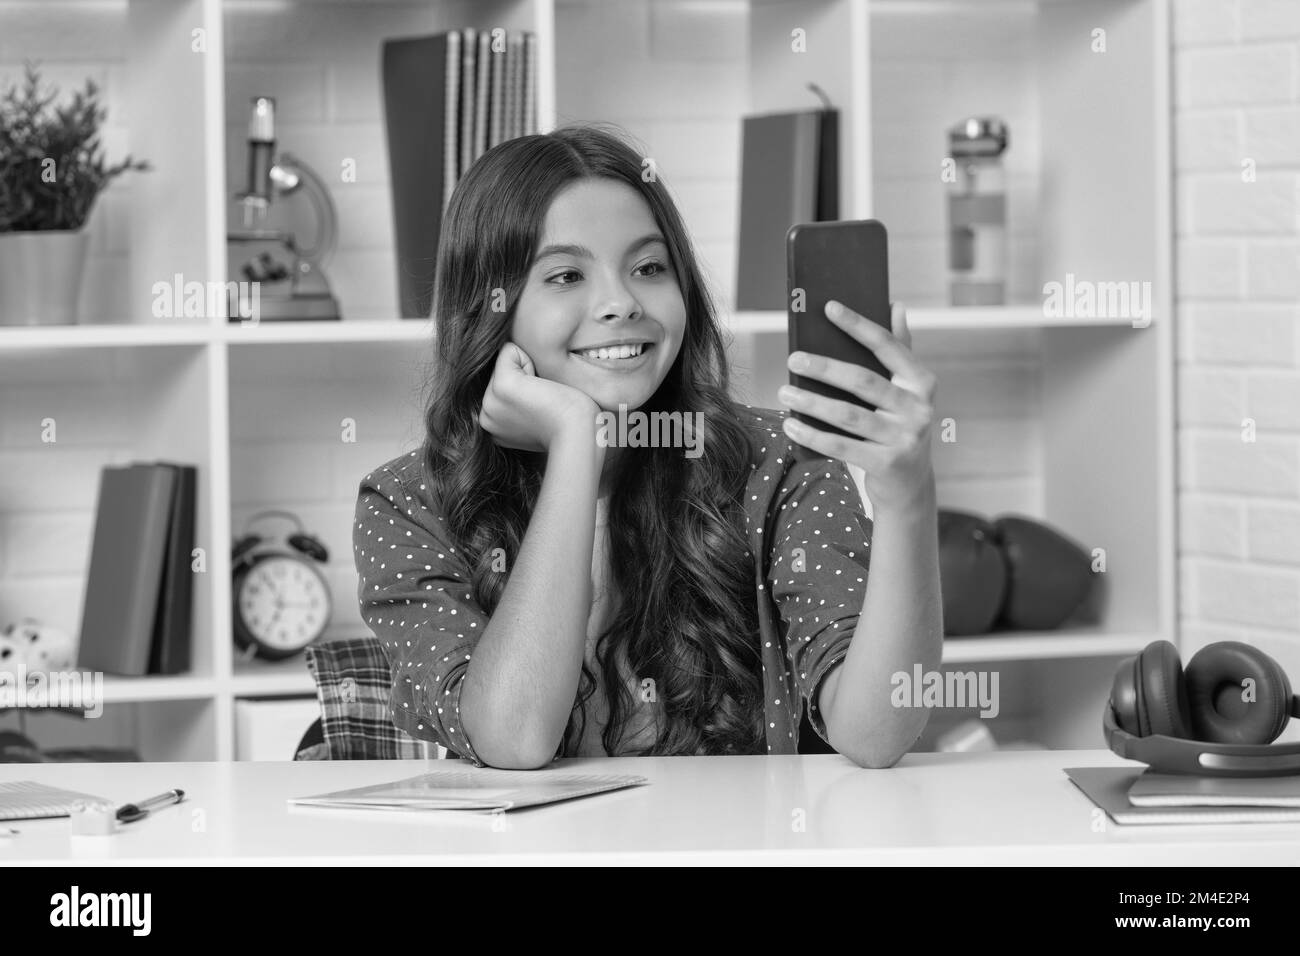 blogging on phone. vlogger with cellphone having curly hair. glad teen girl blogger Stock Photo